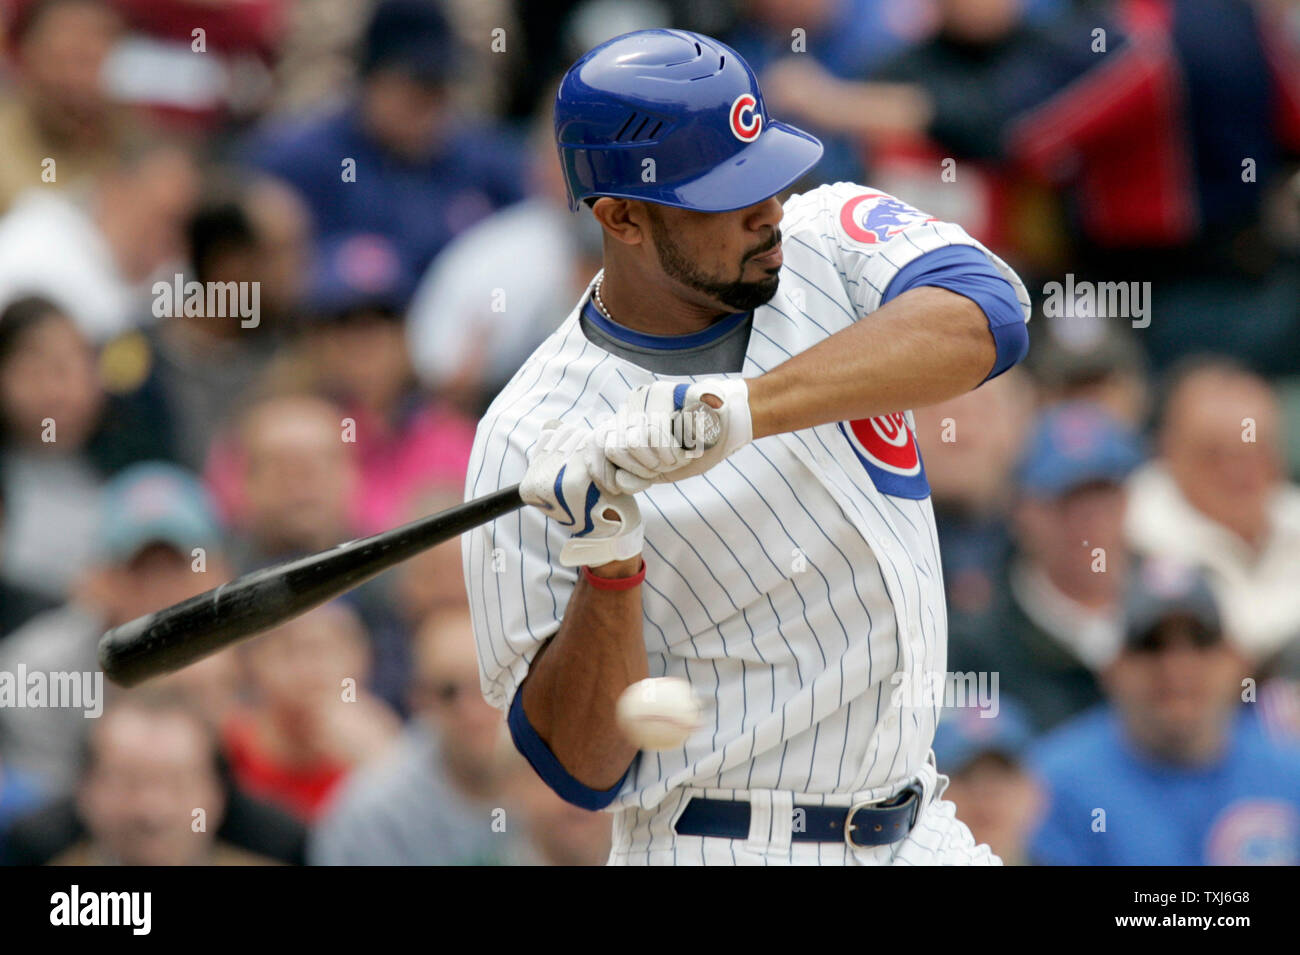 Chicago Cubs first baseman Derrek Lee (25) watches as the ball sails foul  down the right field line during the game between the Houston Astros and  Chicago Cubs at Wrigley Field in